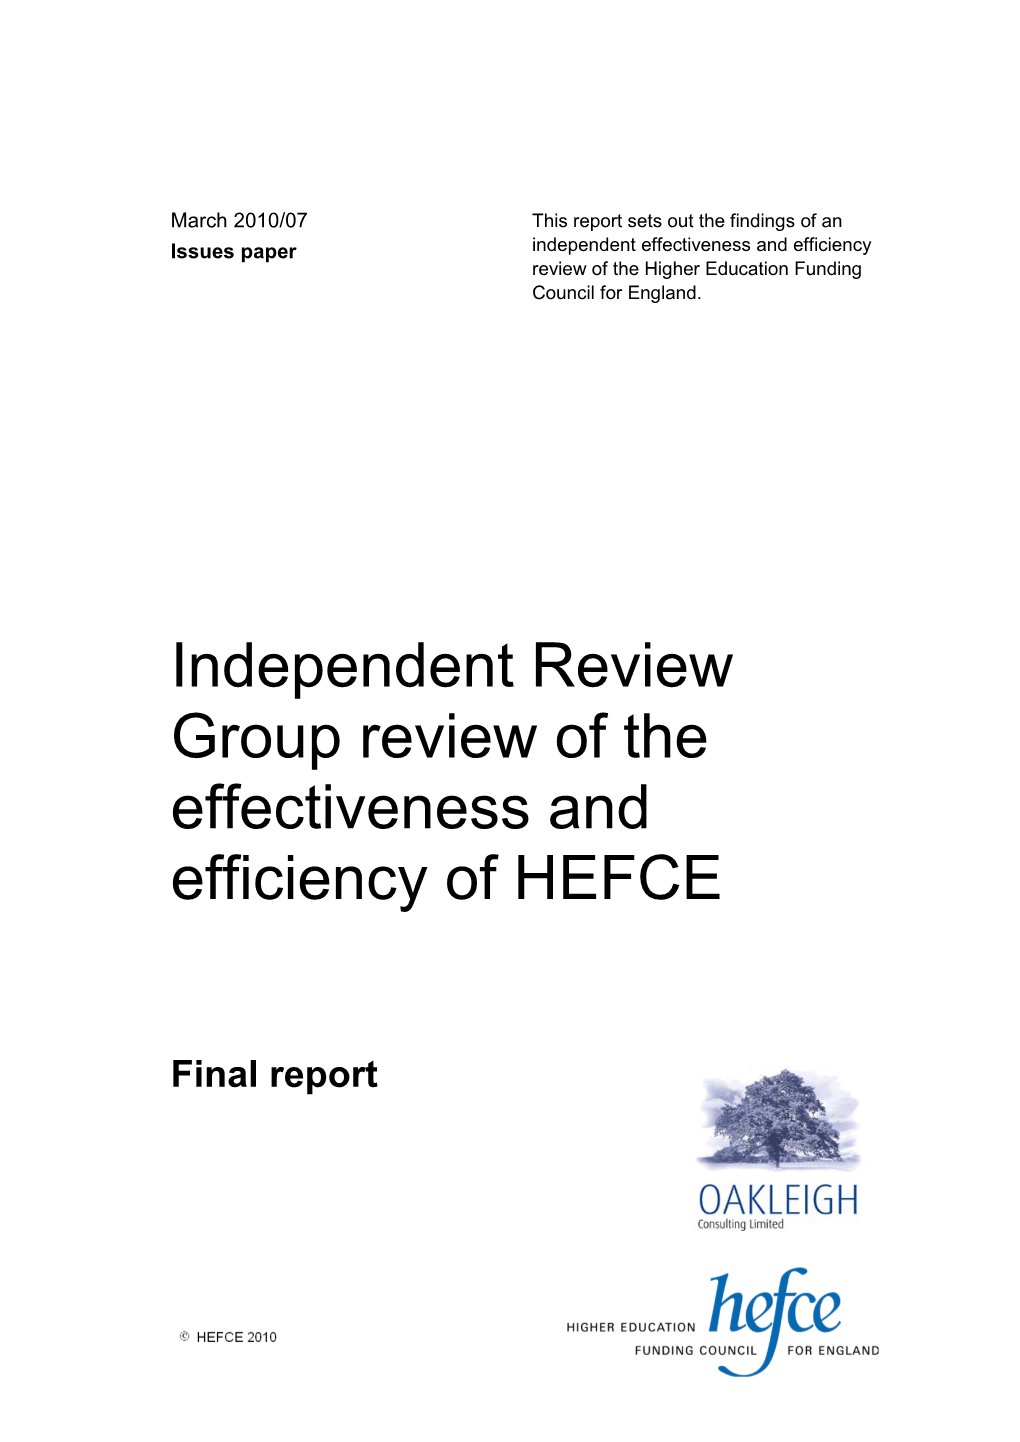 Independent Review Group Review of the Effectiveness and Efficiency of HEFCE